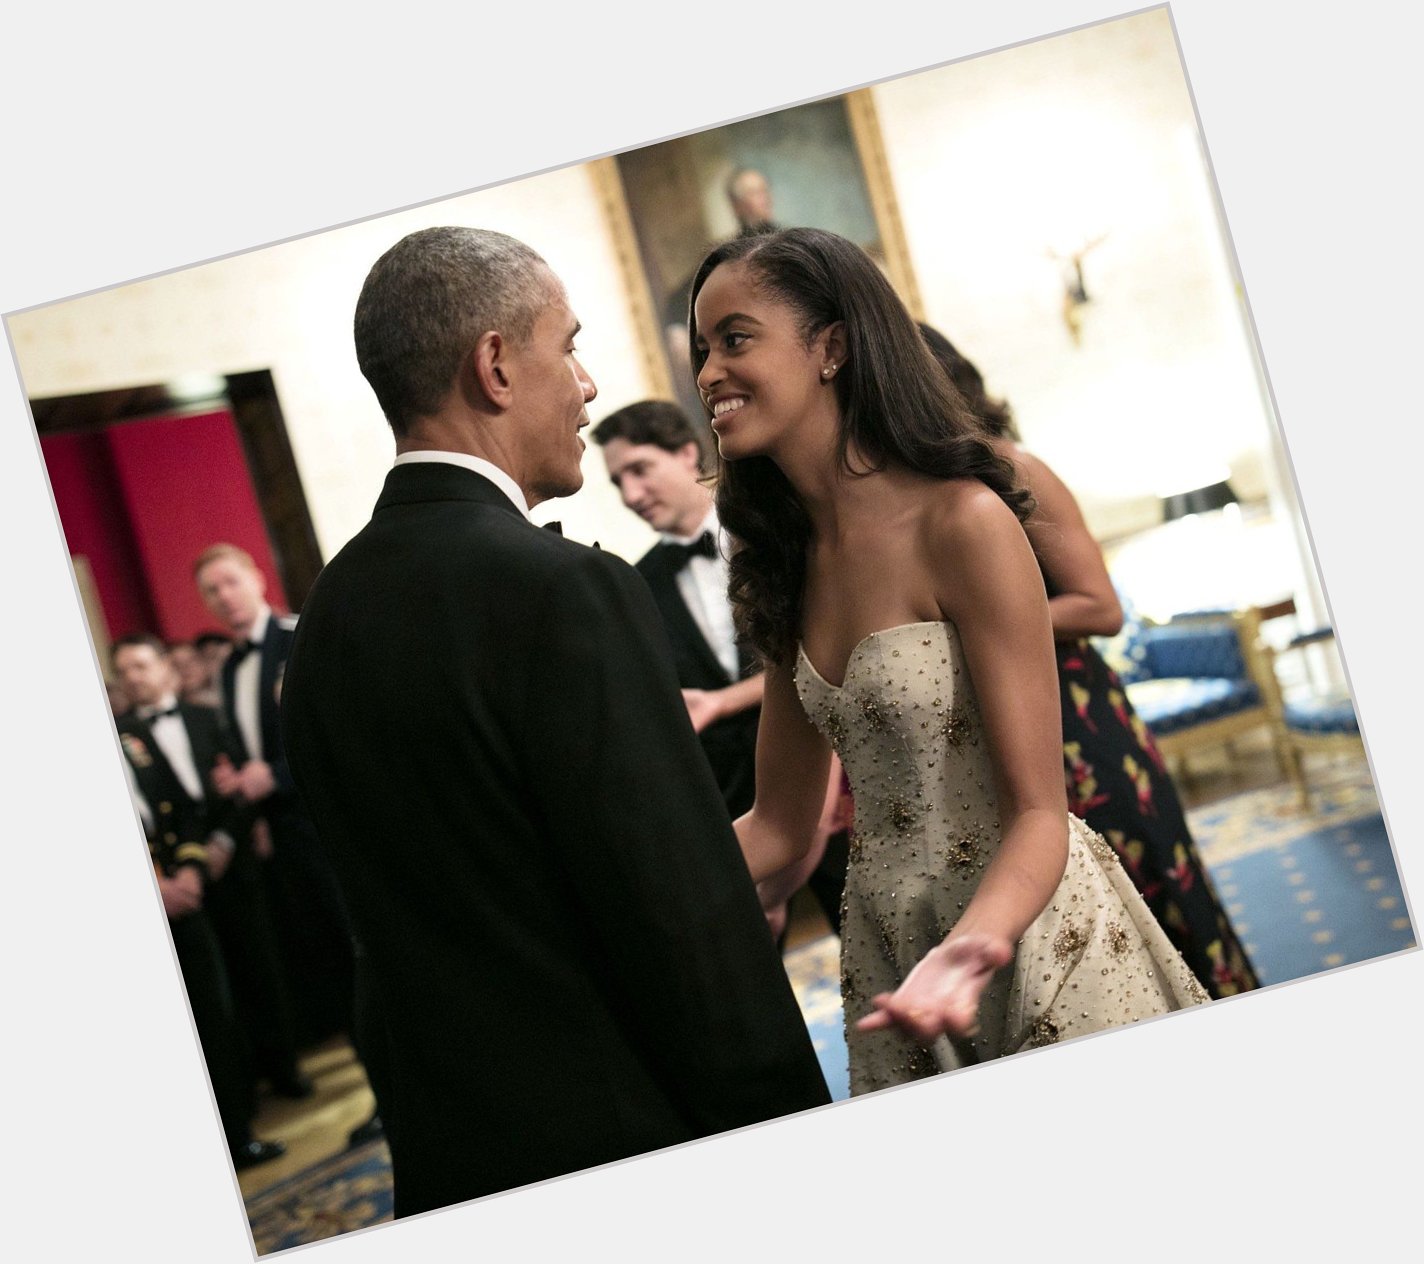 Y\all hear sumn? Anyway... Happy Birthday, Malia Obama! Hope you have a day as great as you are! 